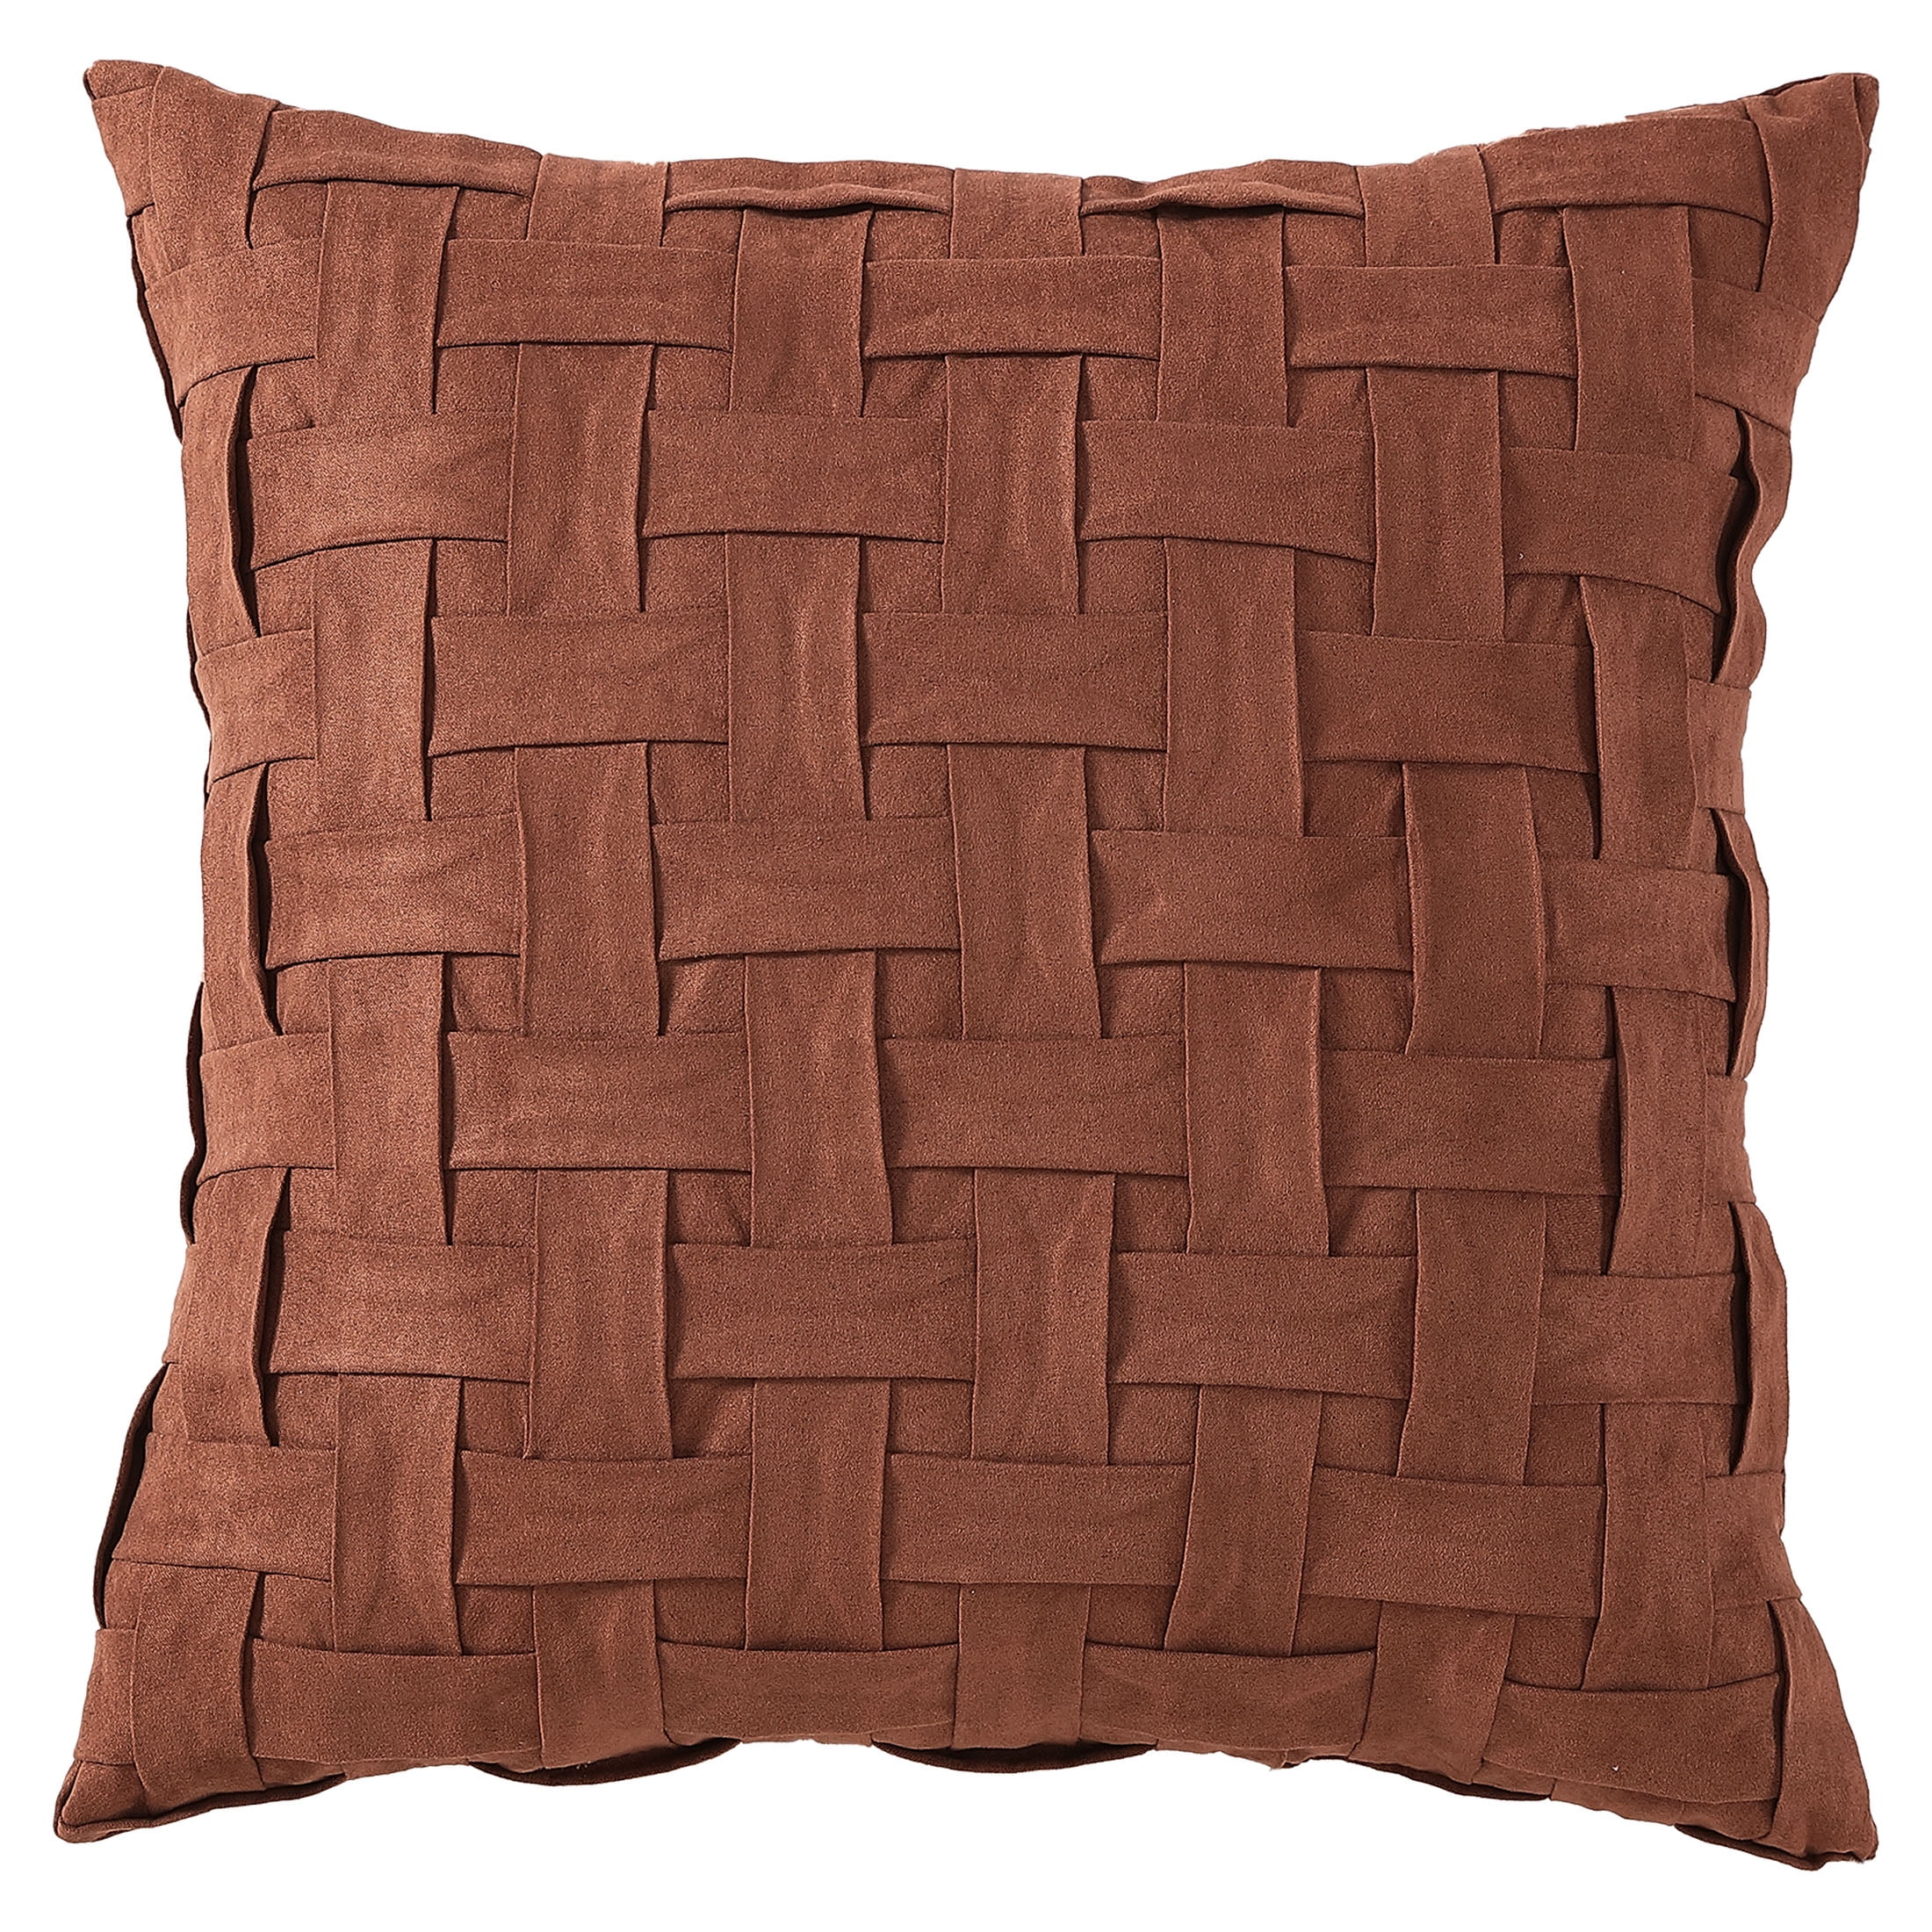 Mainstays, Rust Textured Decorative Throw Pillow, Rust, 18" x 18", Square, 1 Pack